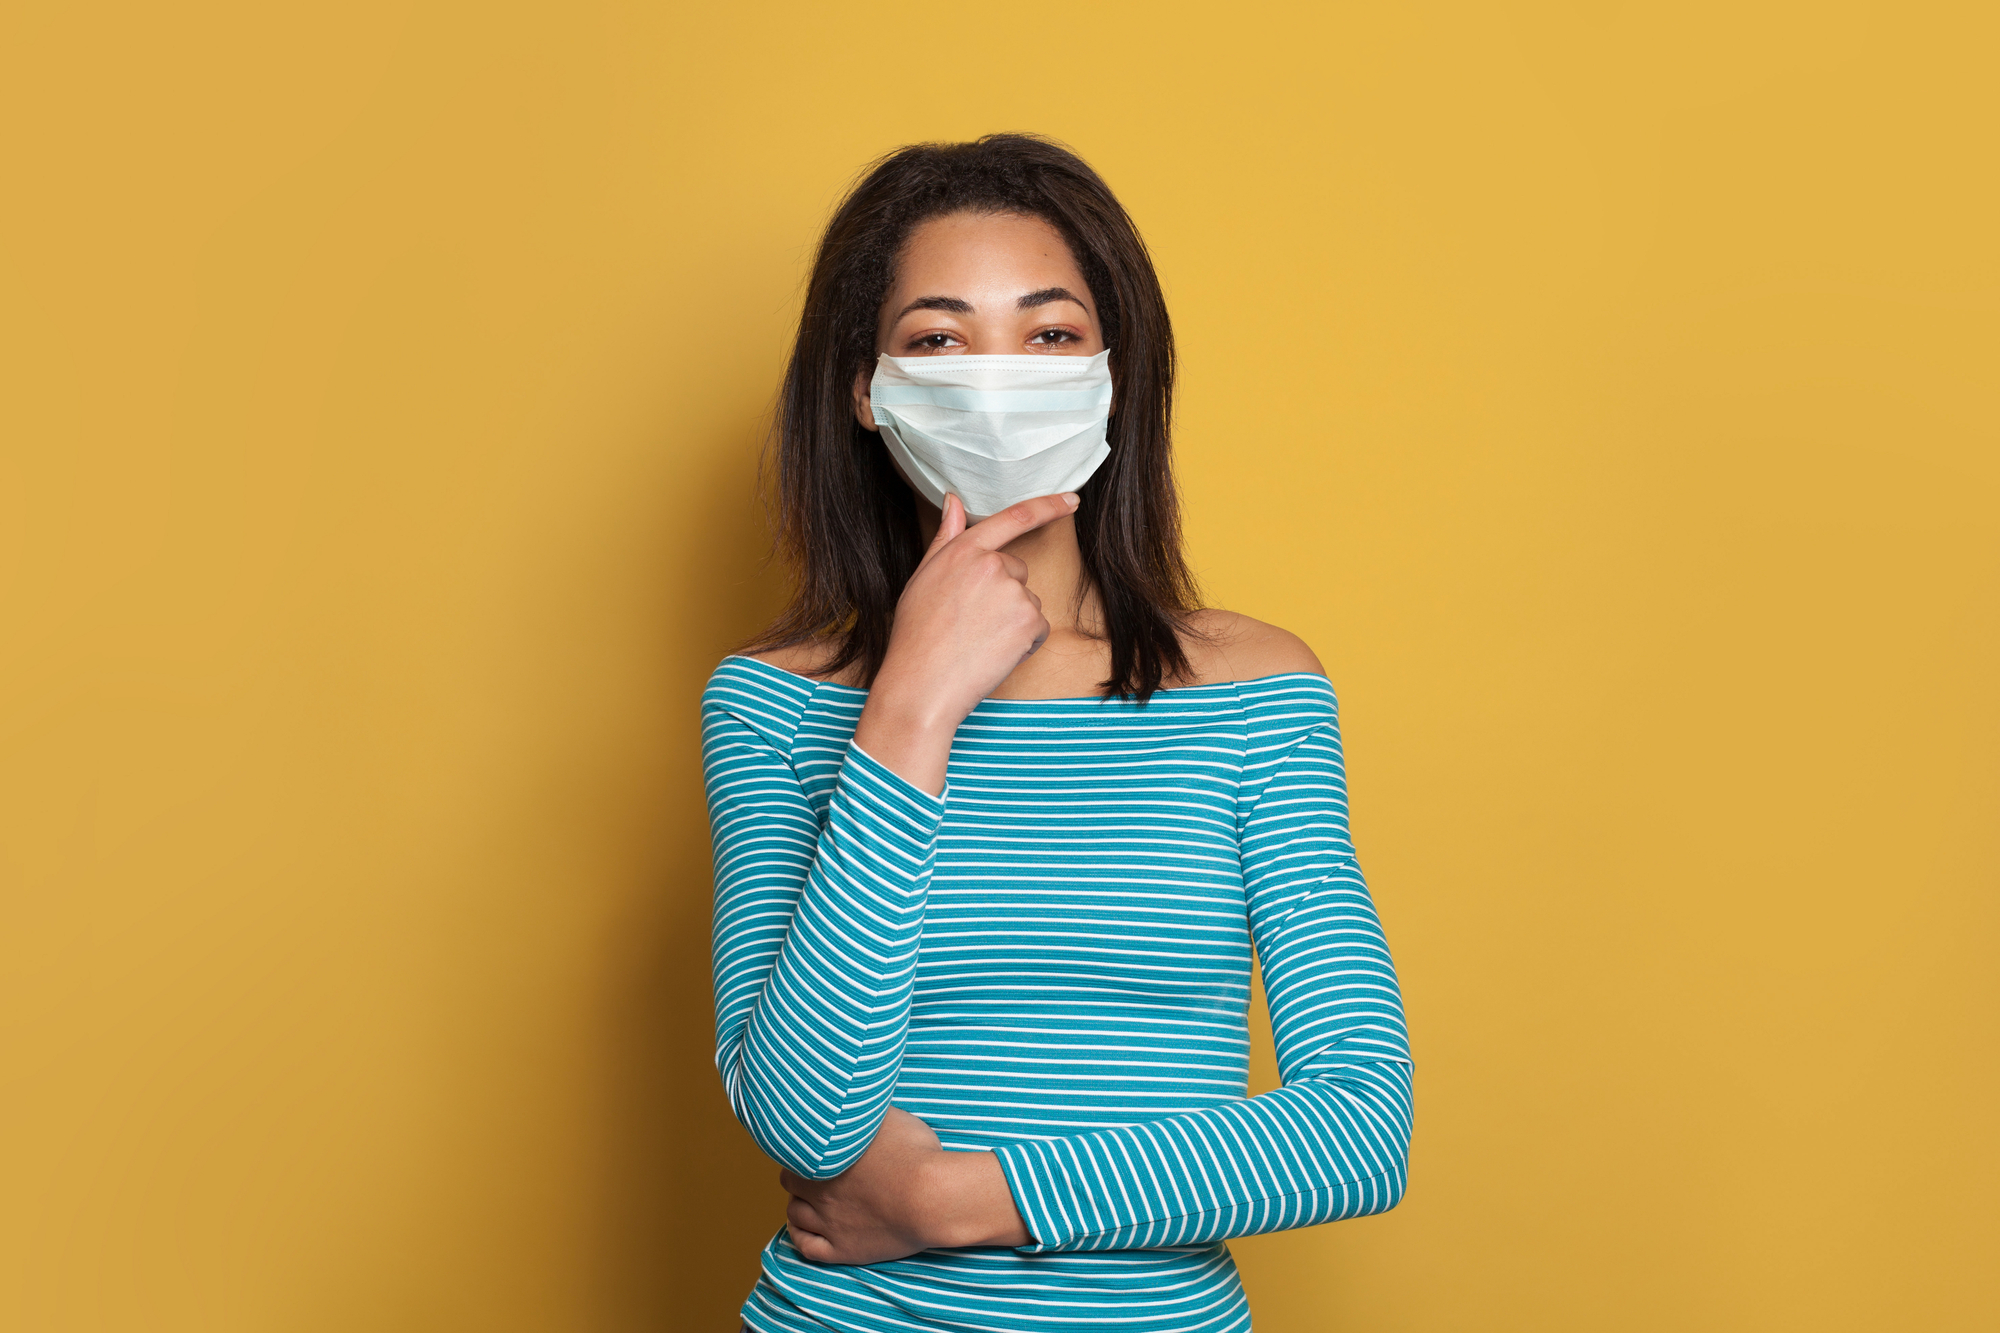 Black woman in medical safety face mask thinking on yellow background